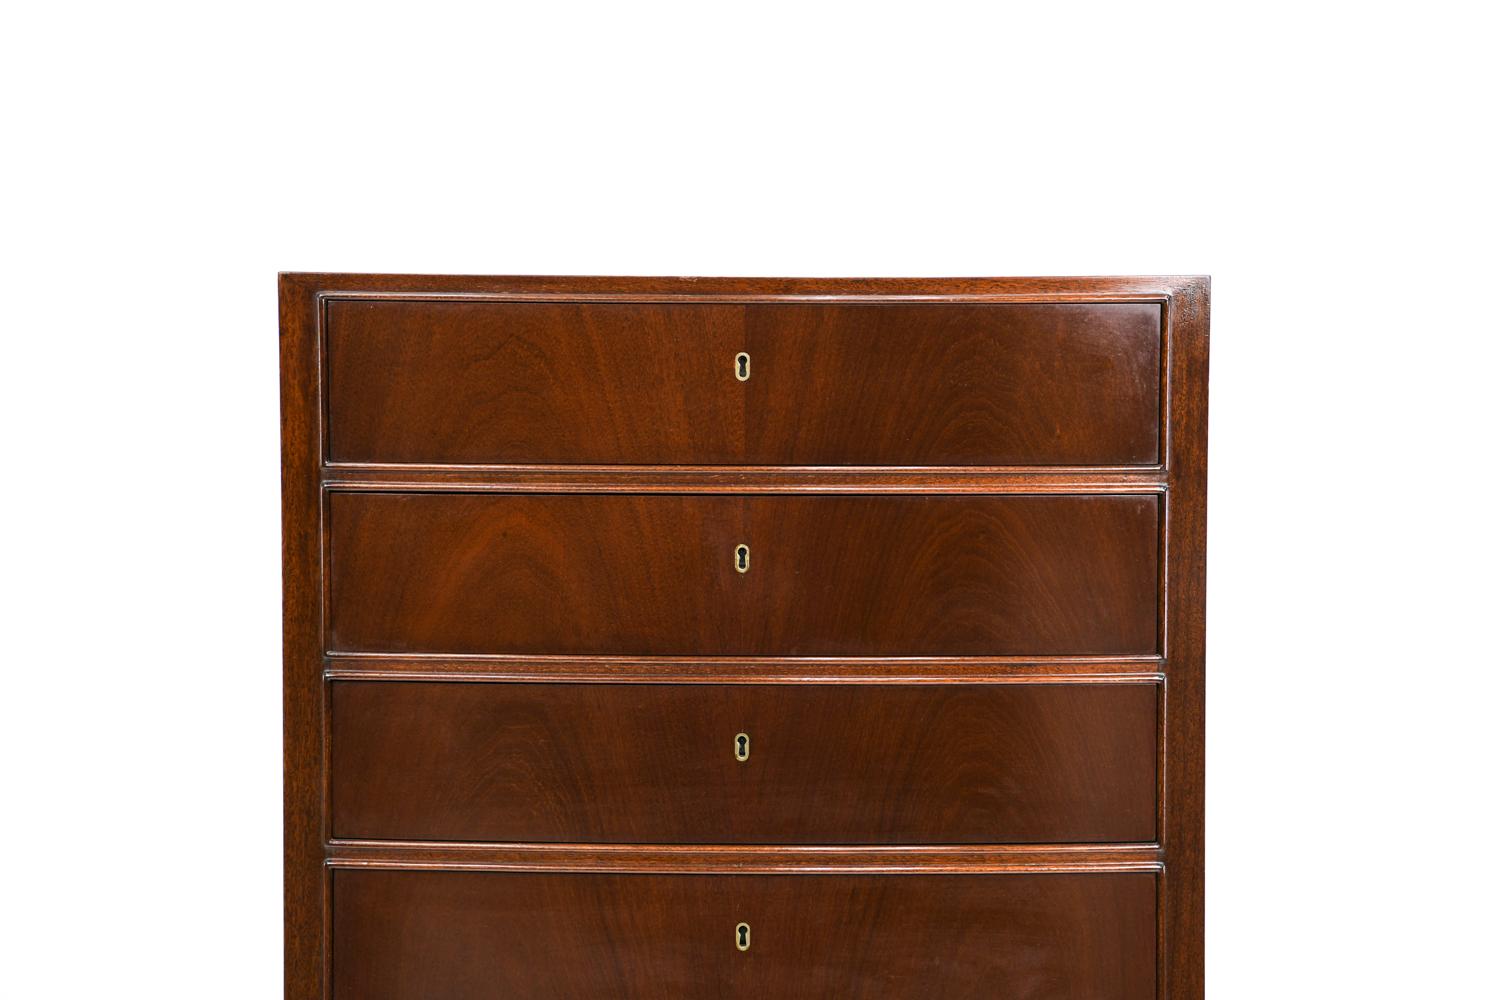 A mahogany chest of drawers with a slightly curved front and seven drawers with individual locks. Designed by Ole Wanscher and manufactured for retailer Illums Bolighus, Denmark, circa 1957.
 